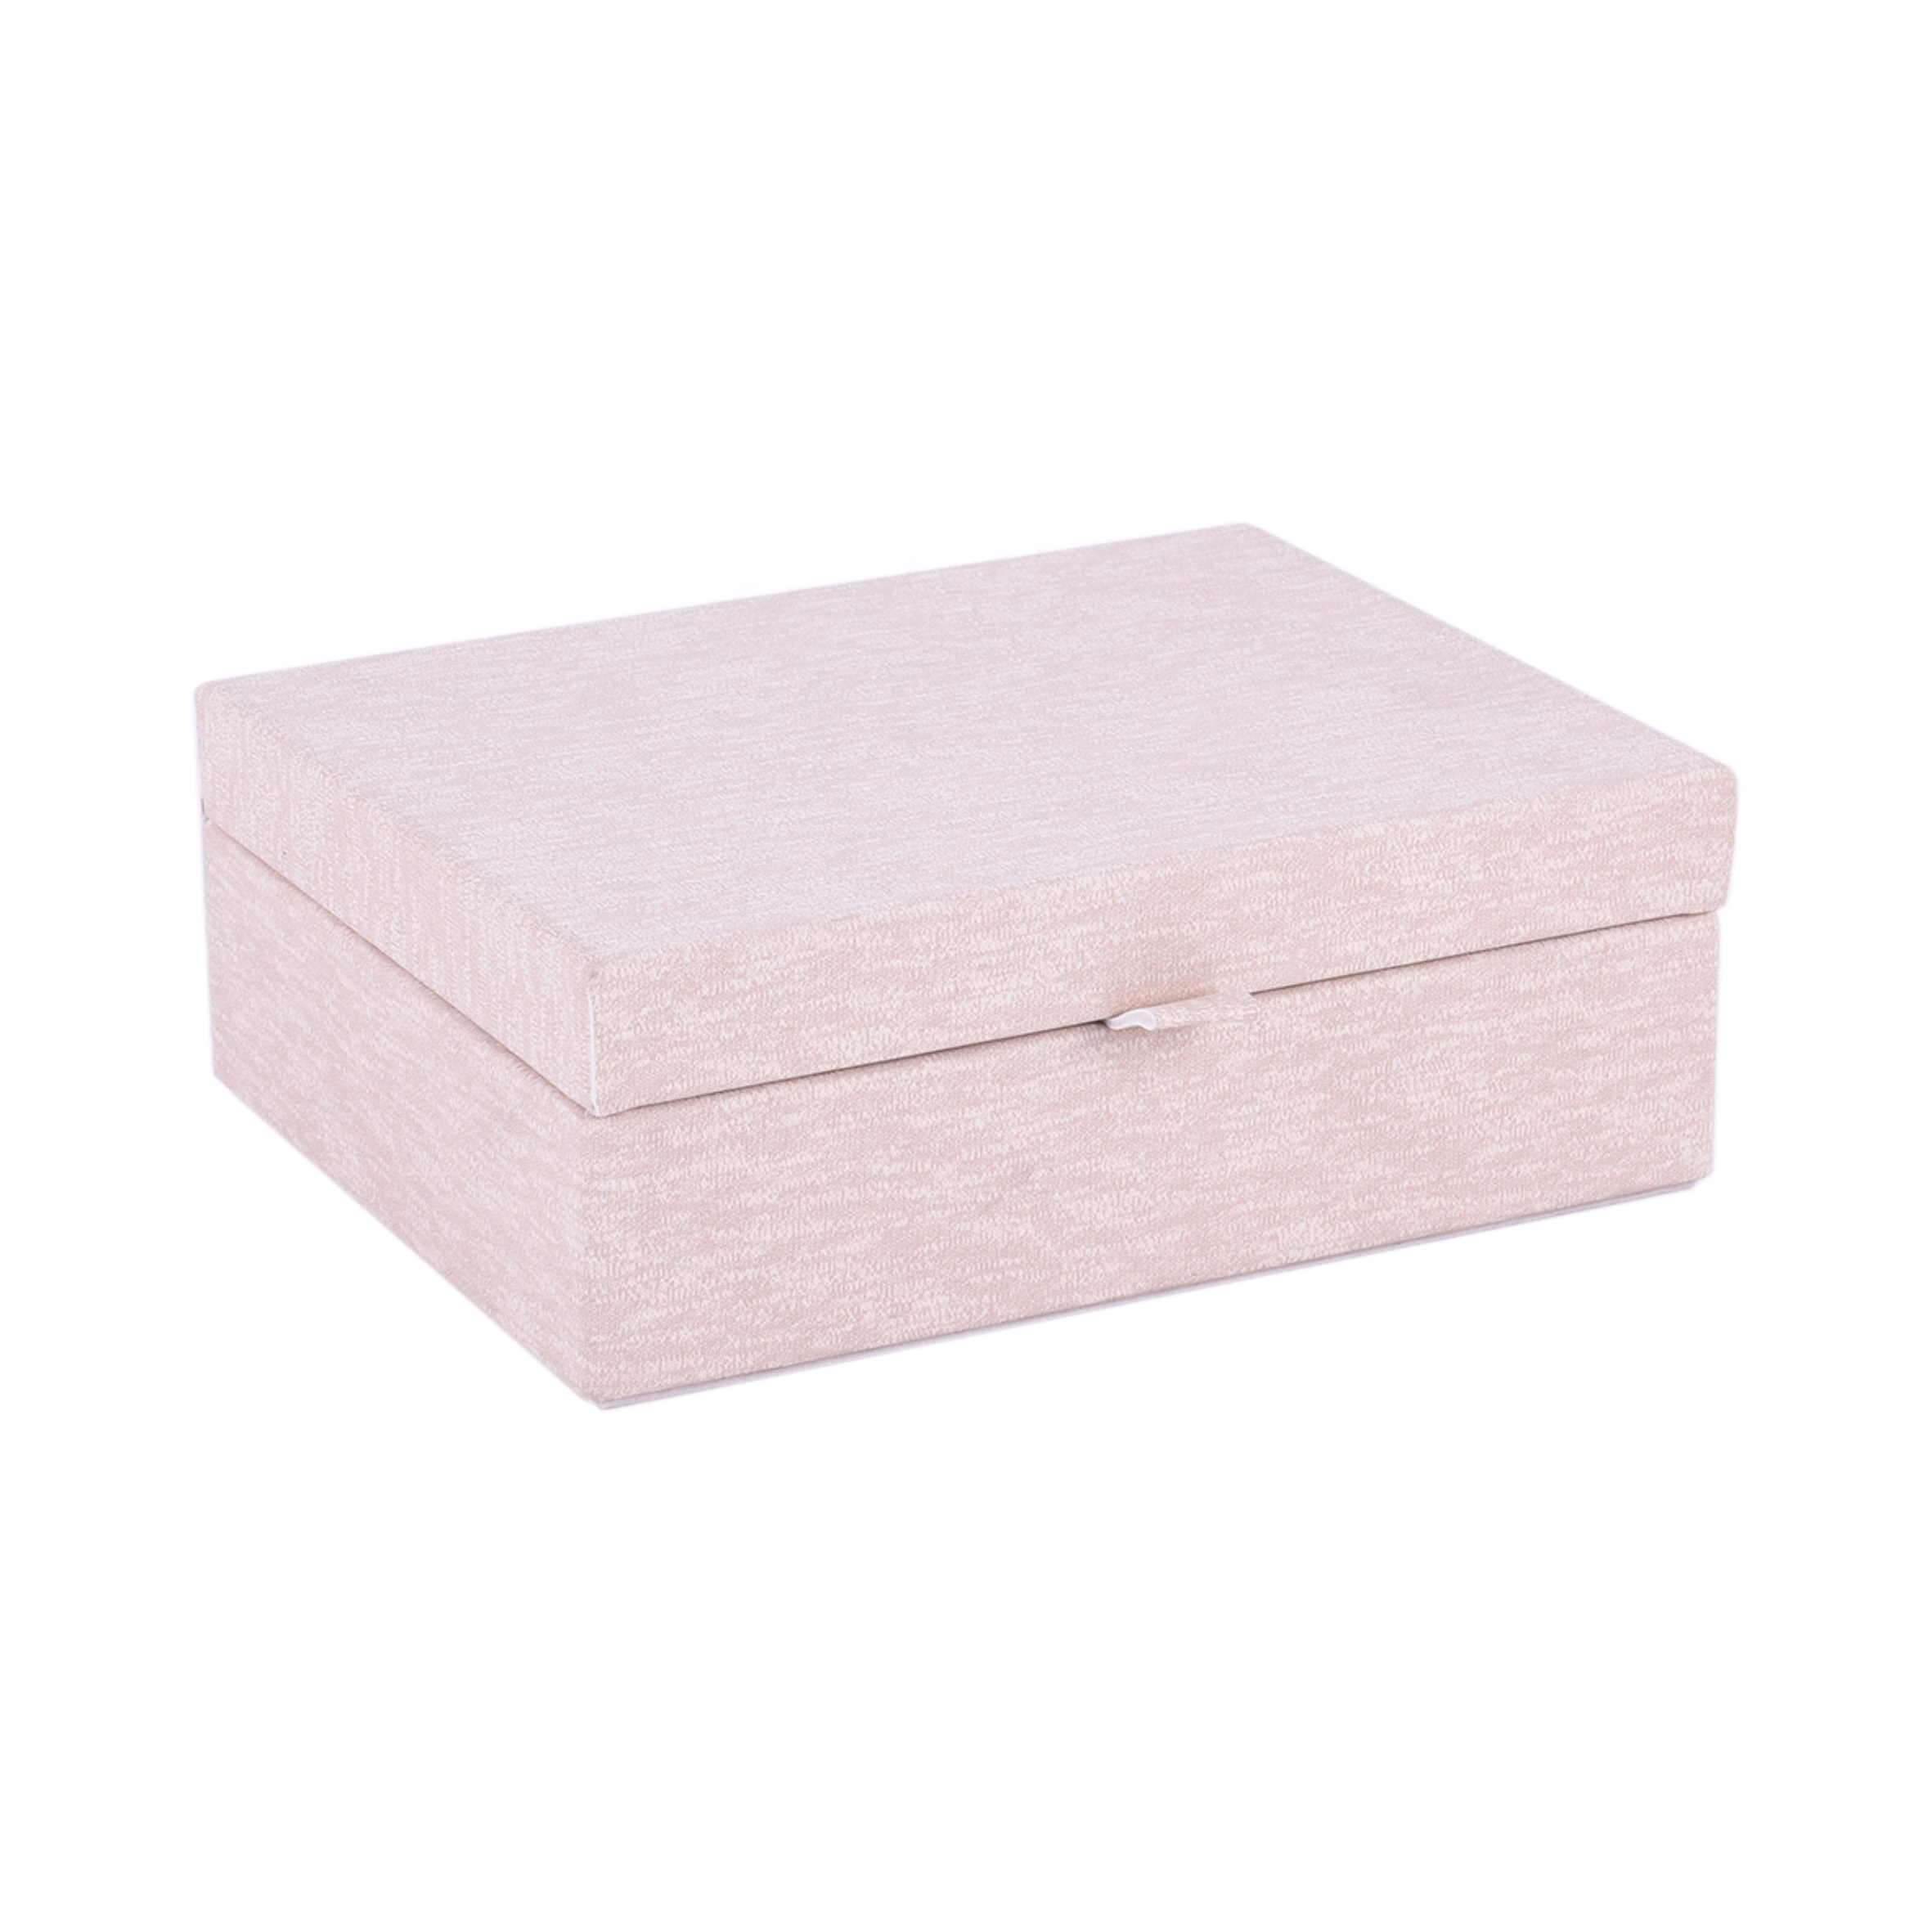 Light pink Simple Home Decoration Storage Box Package Box